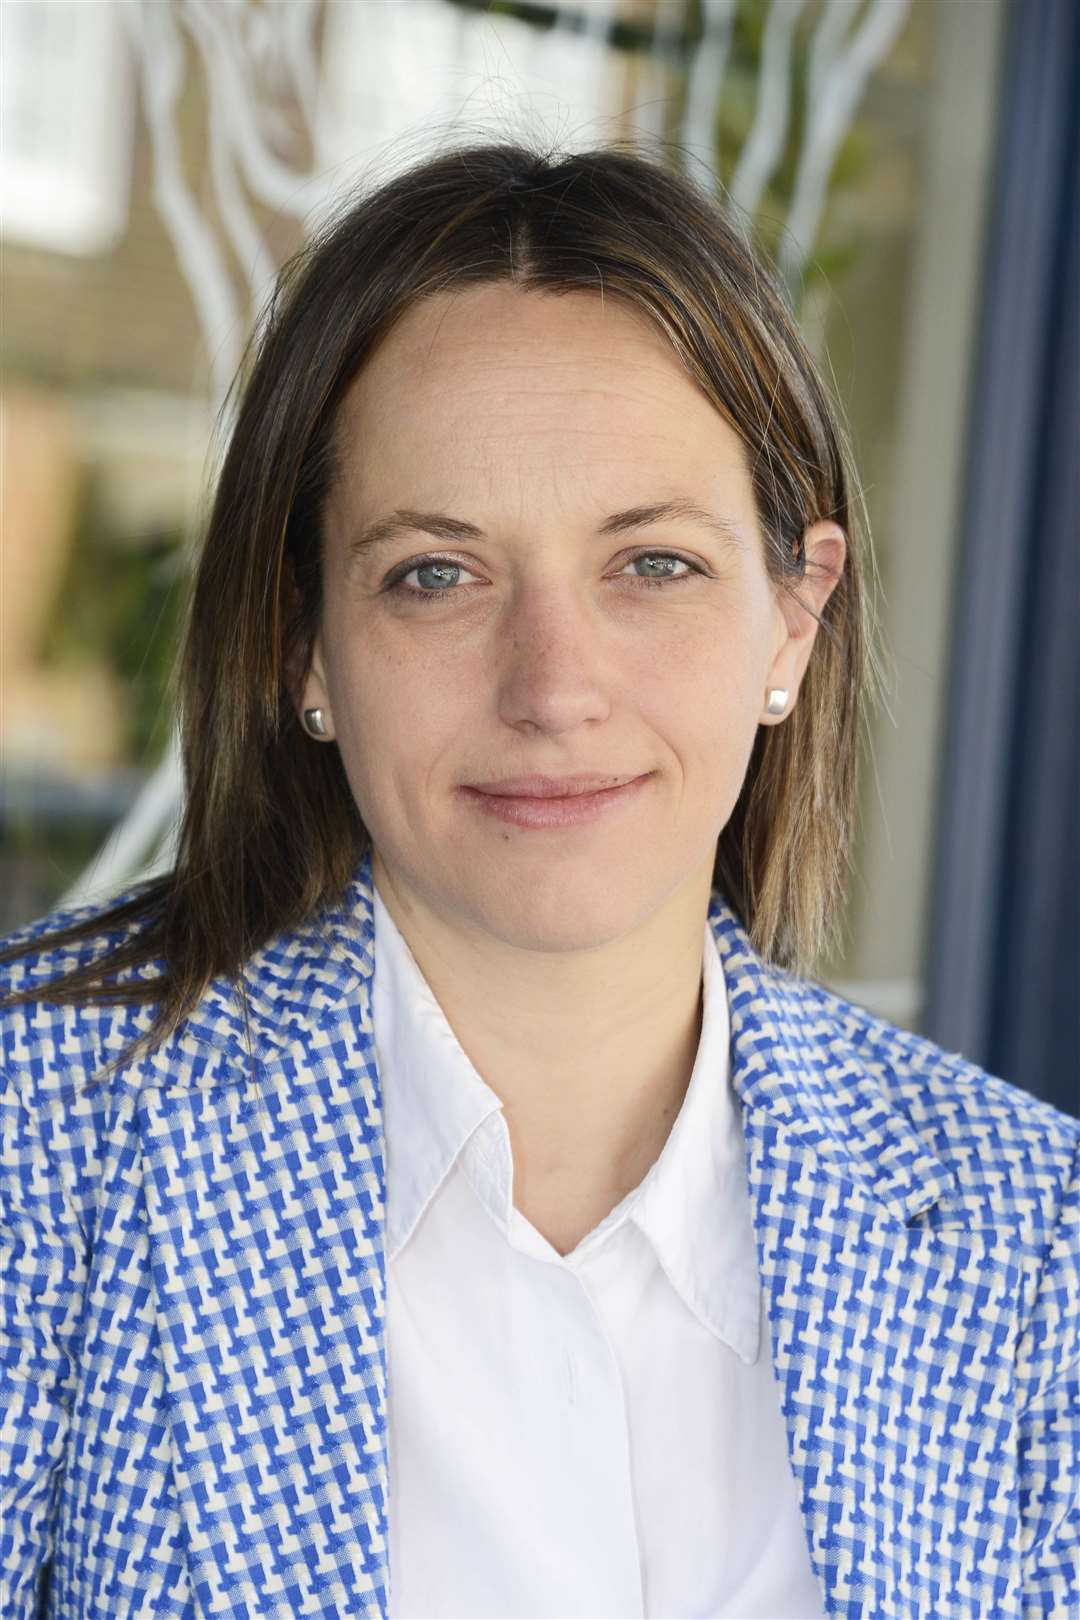 MP Helen Whately